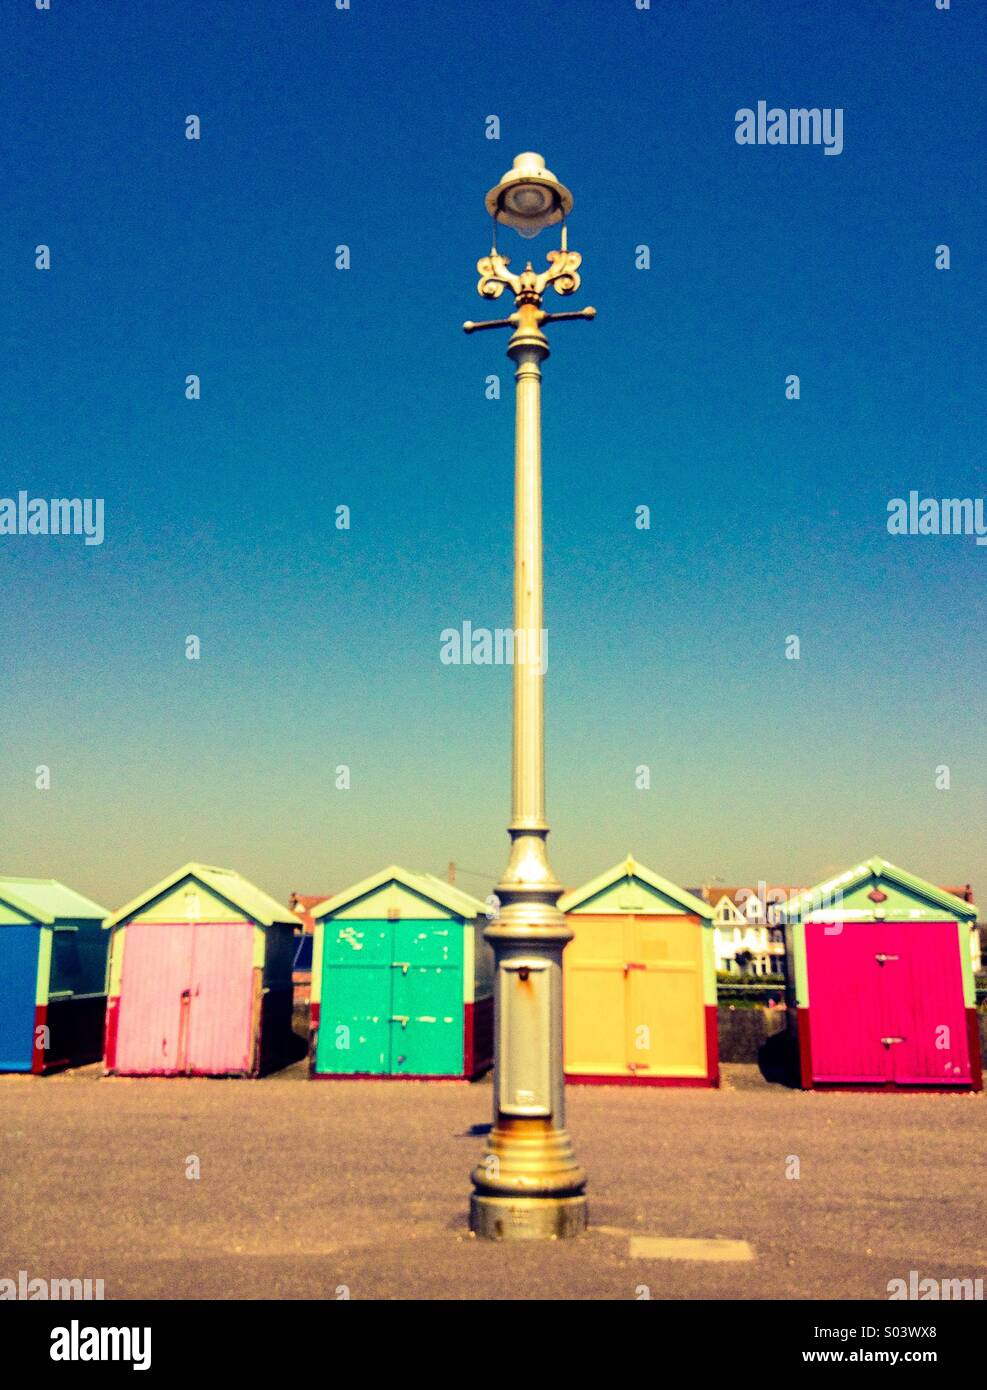 Beach huts at seaside with lamppost Stock Photo